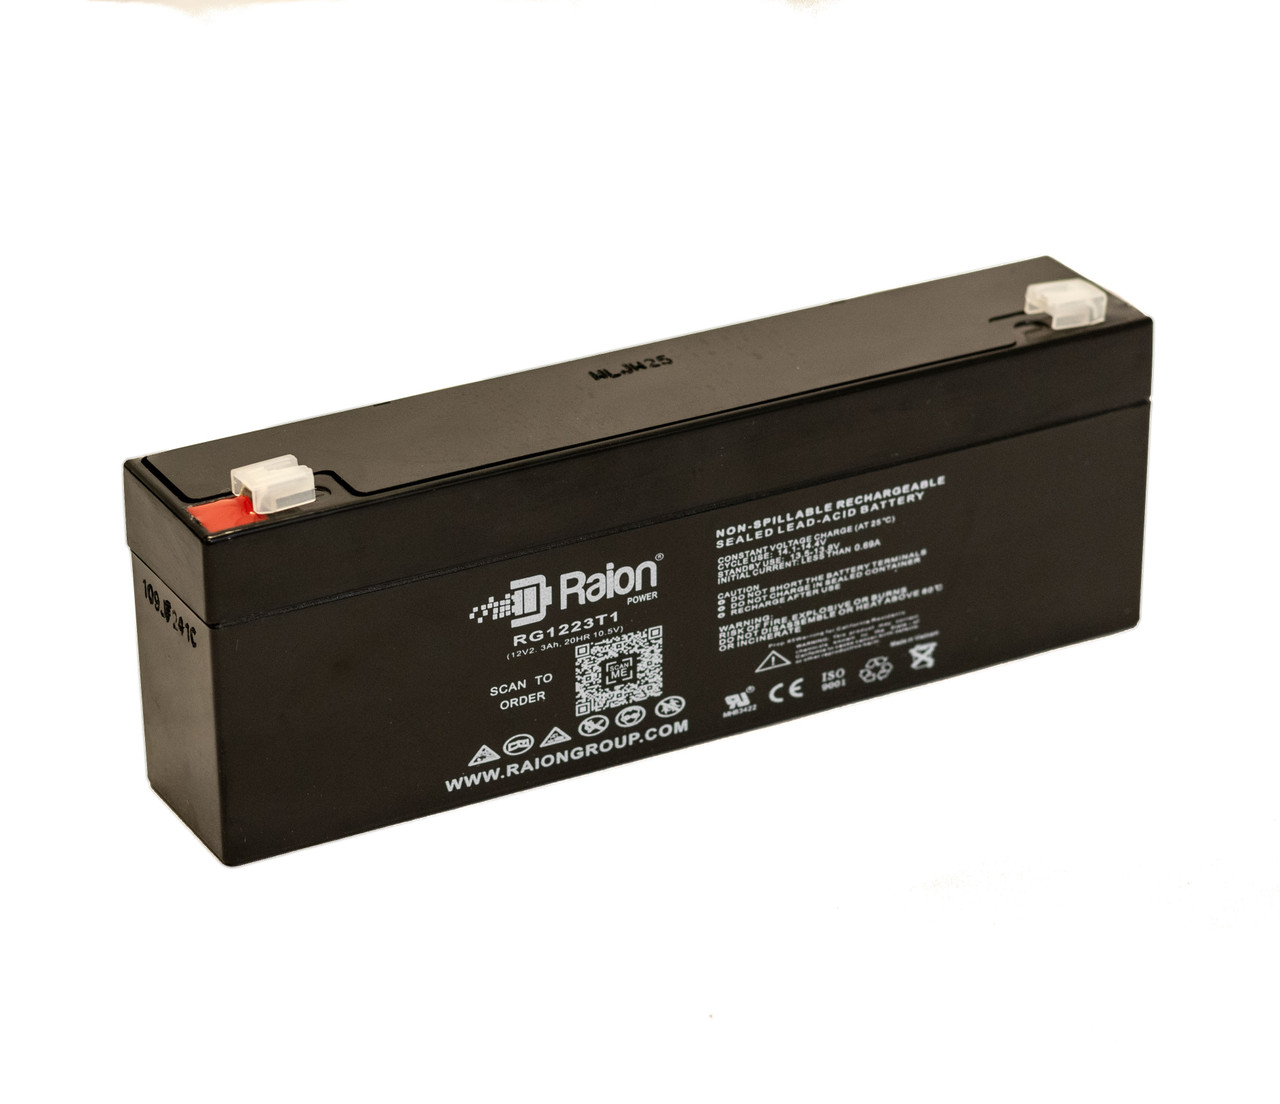 Raion Power RG1223T1 Replacement Battery for Leoch DJW12-2.3